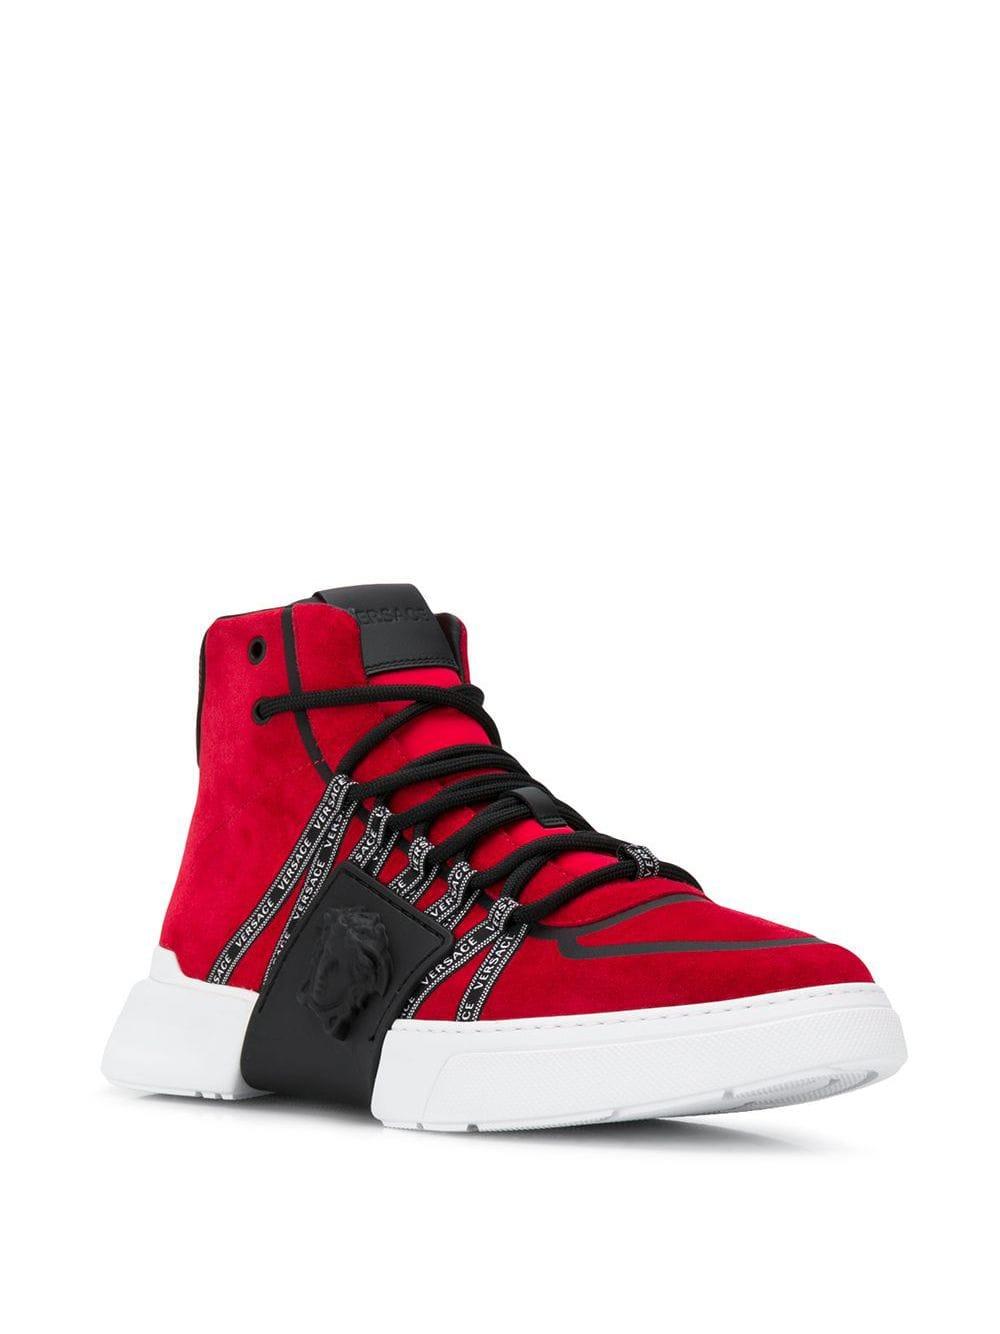 versace red high tops